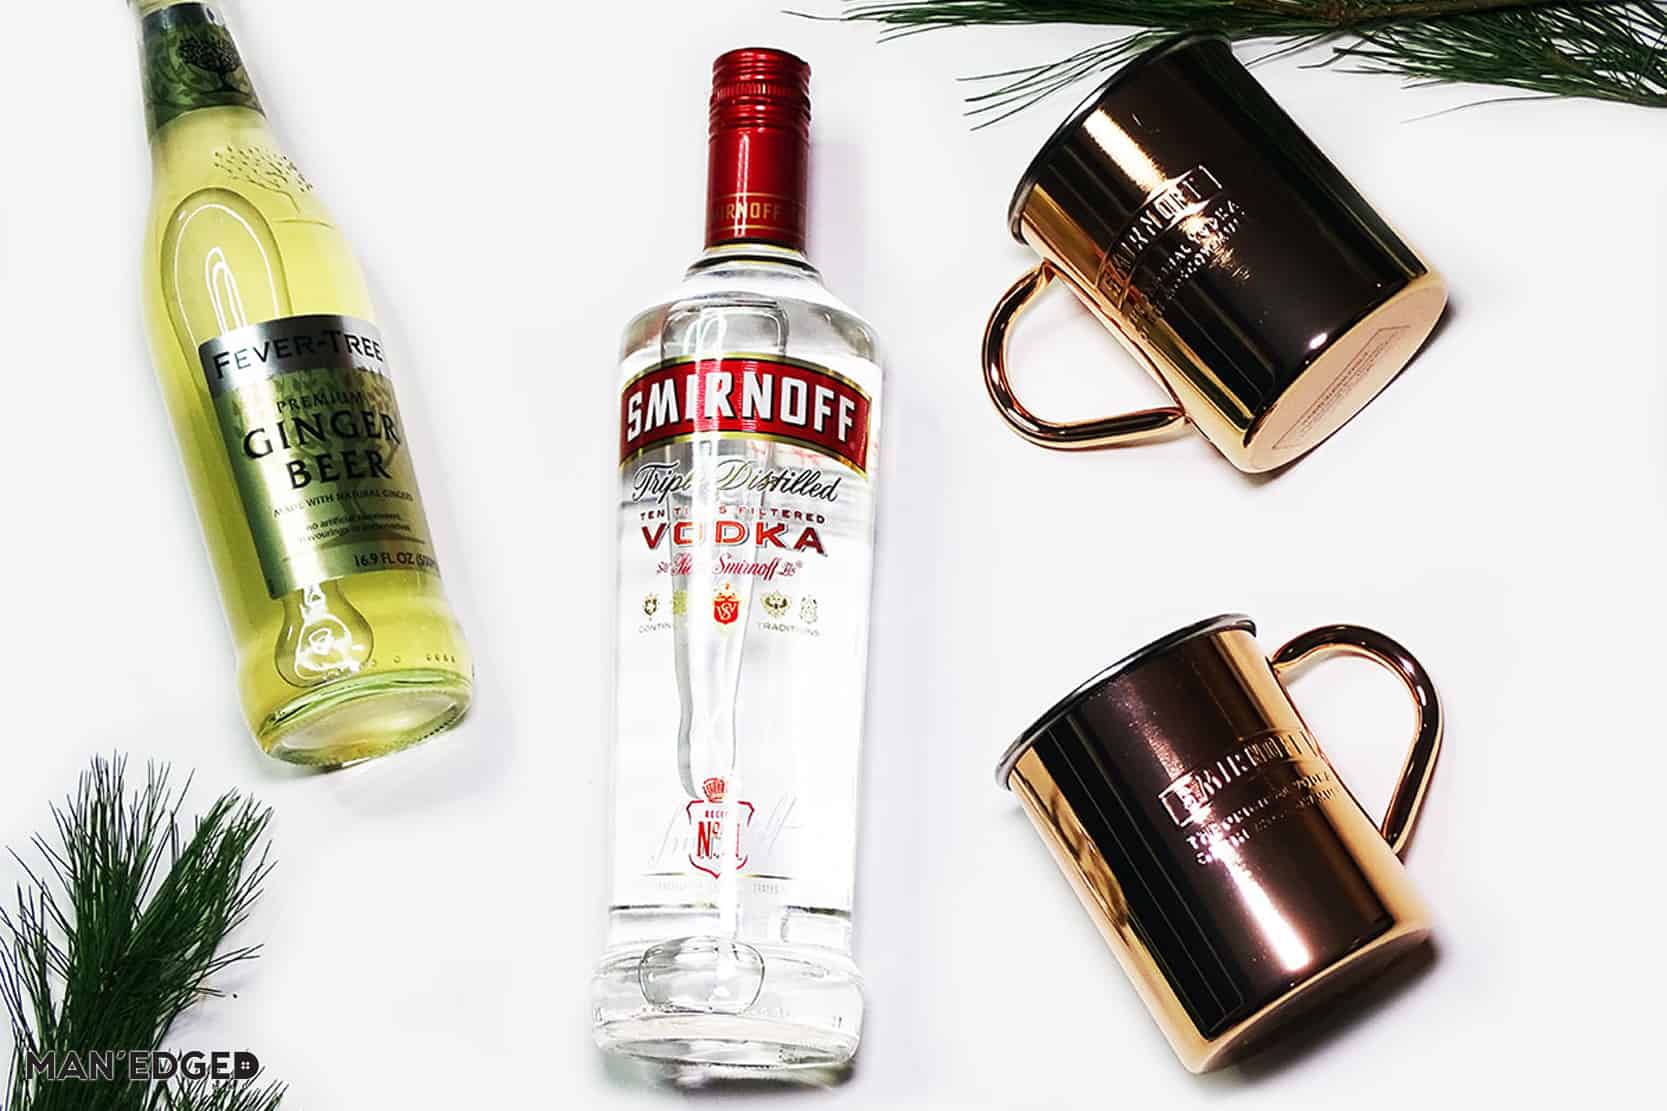 MAN'edged Magazine Holiday Gift Ideas for the Cocktail Guy featuring Moscow Mule Kit with Smirnoff